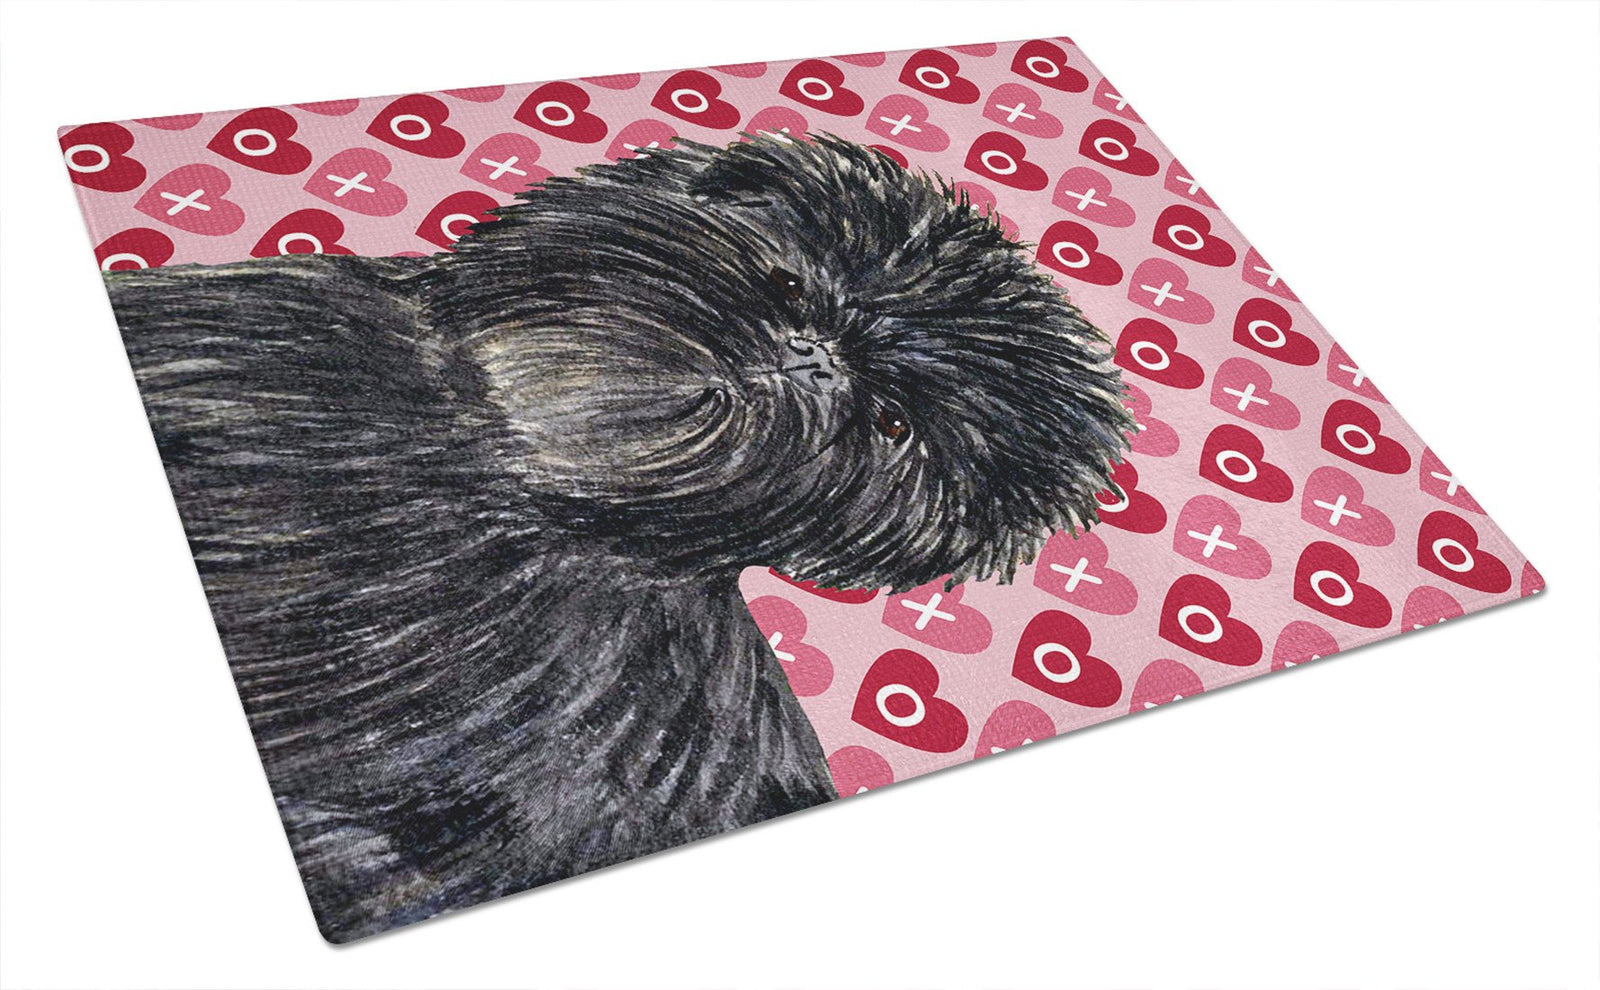 Affenpinscher Hearts Love and Valentine's Day Glass Cutting Board Large by Caroline's Treasures